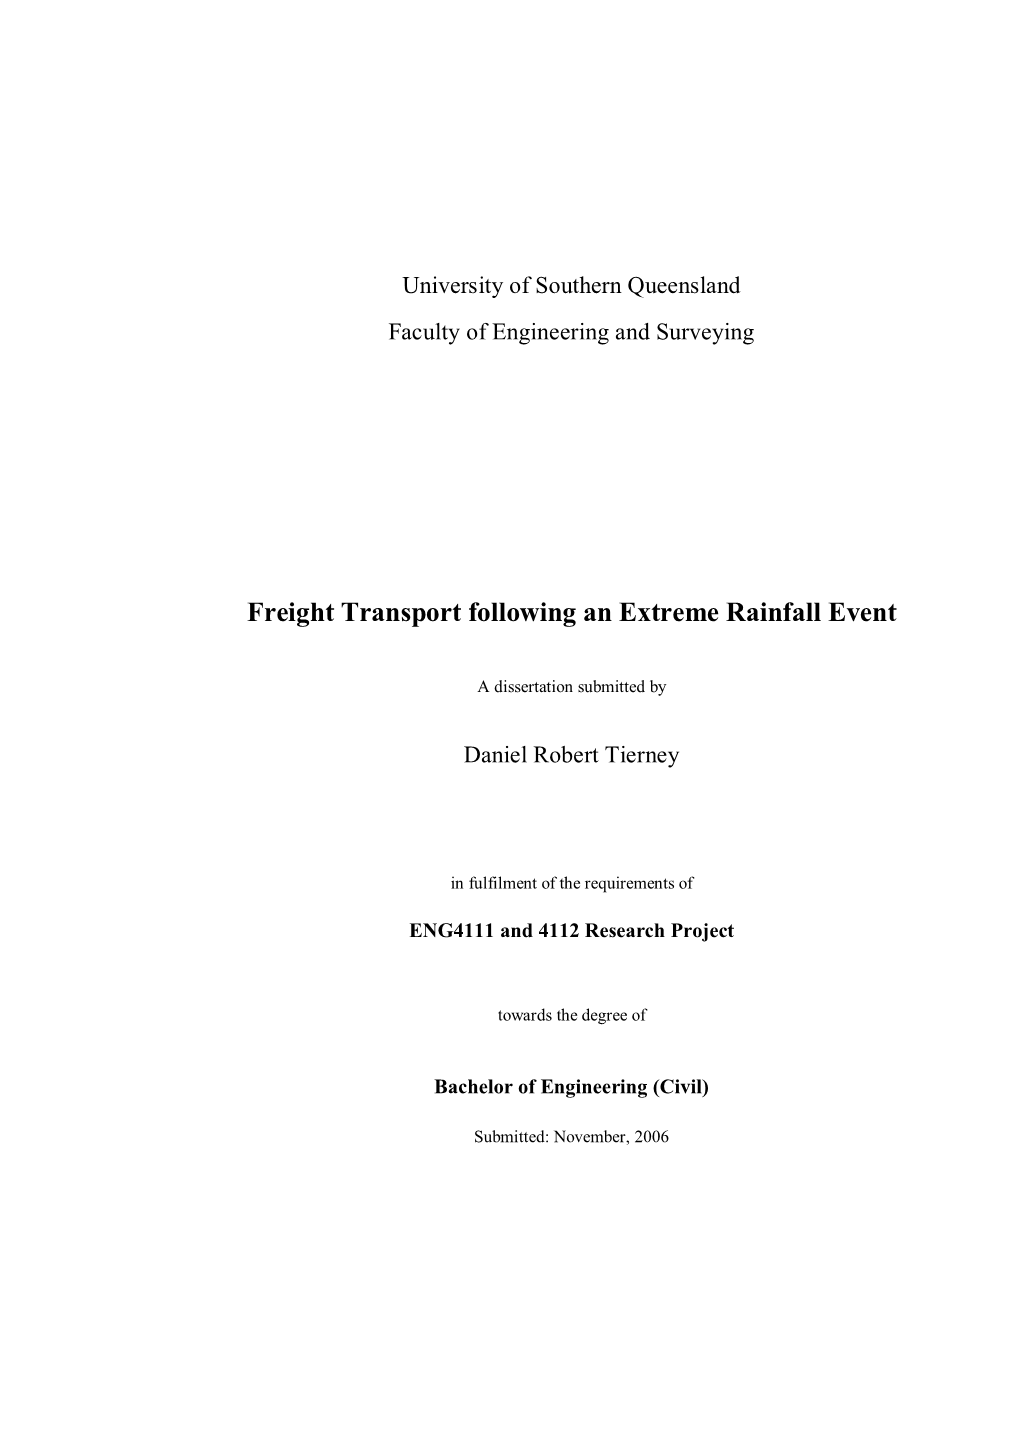 Freight Transport Following an Extreme Rainfall Event